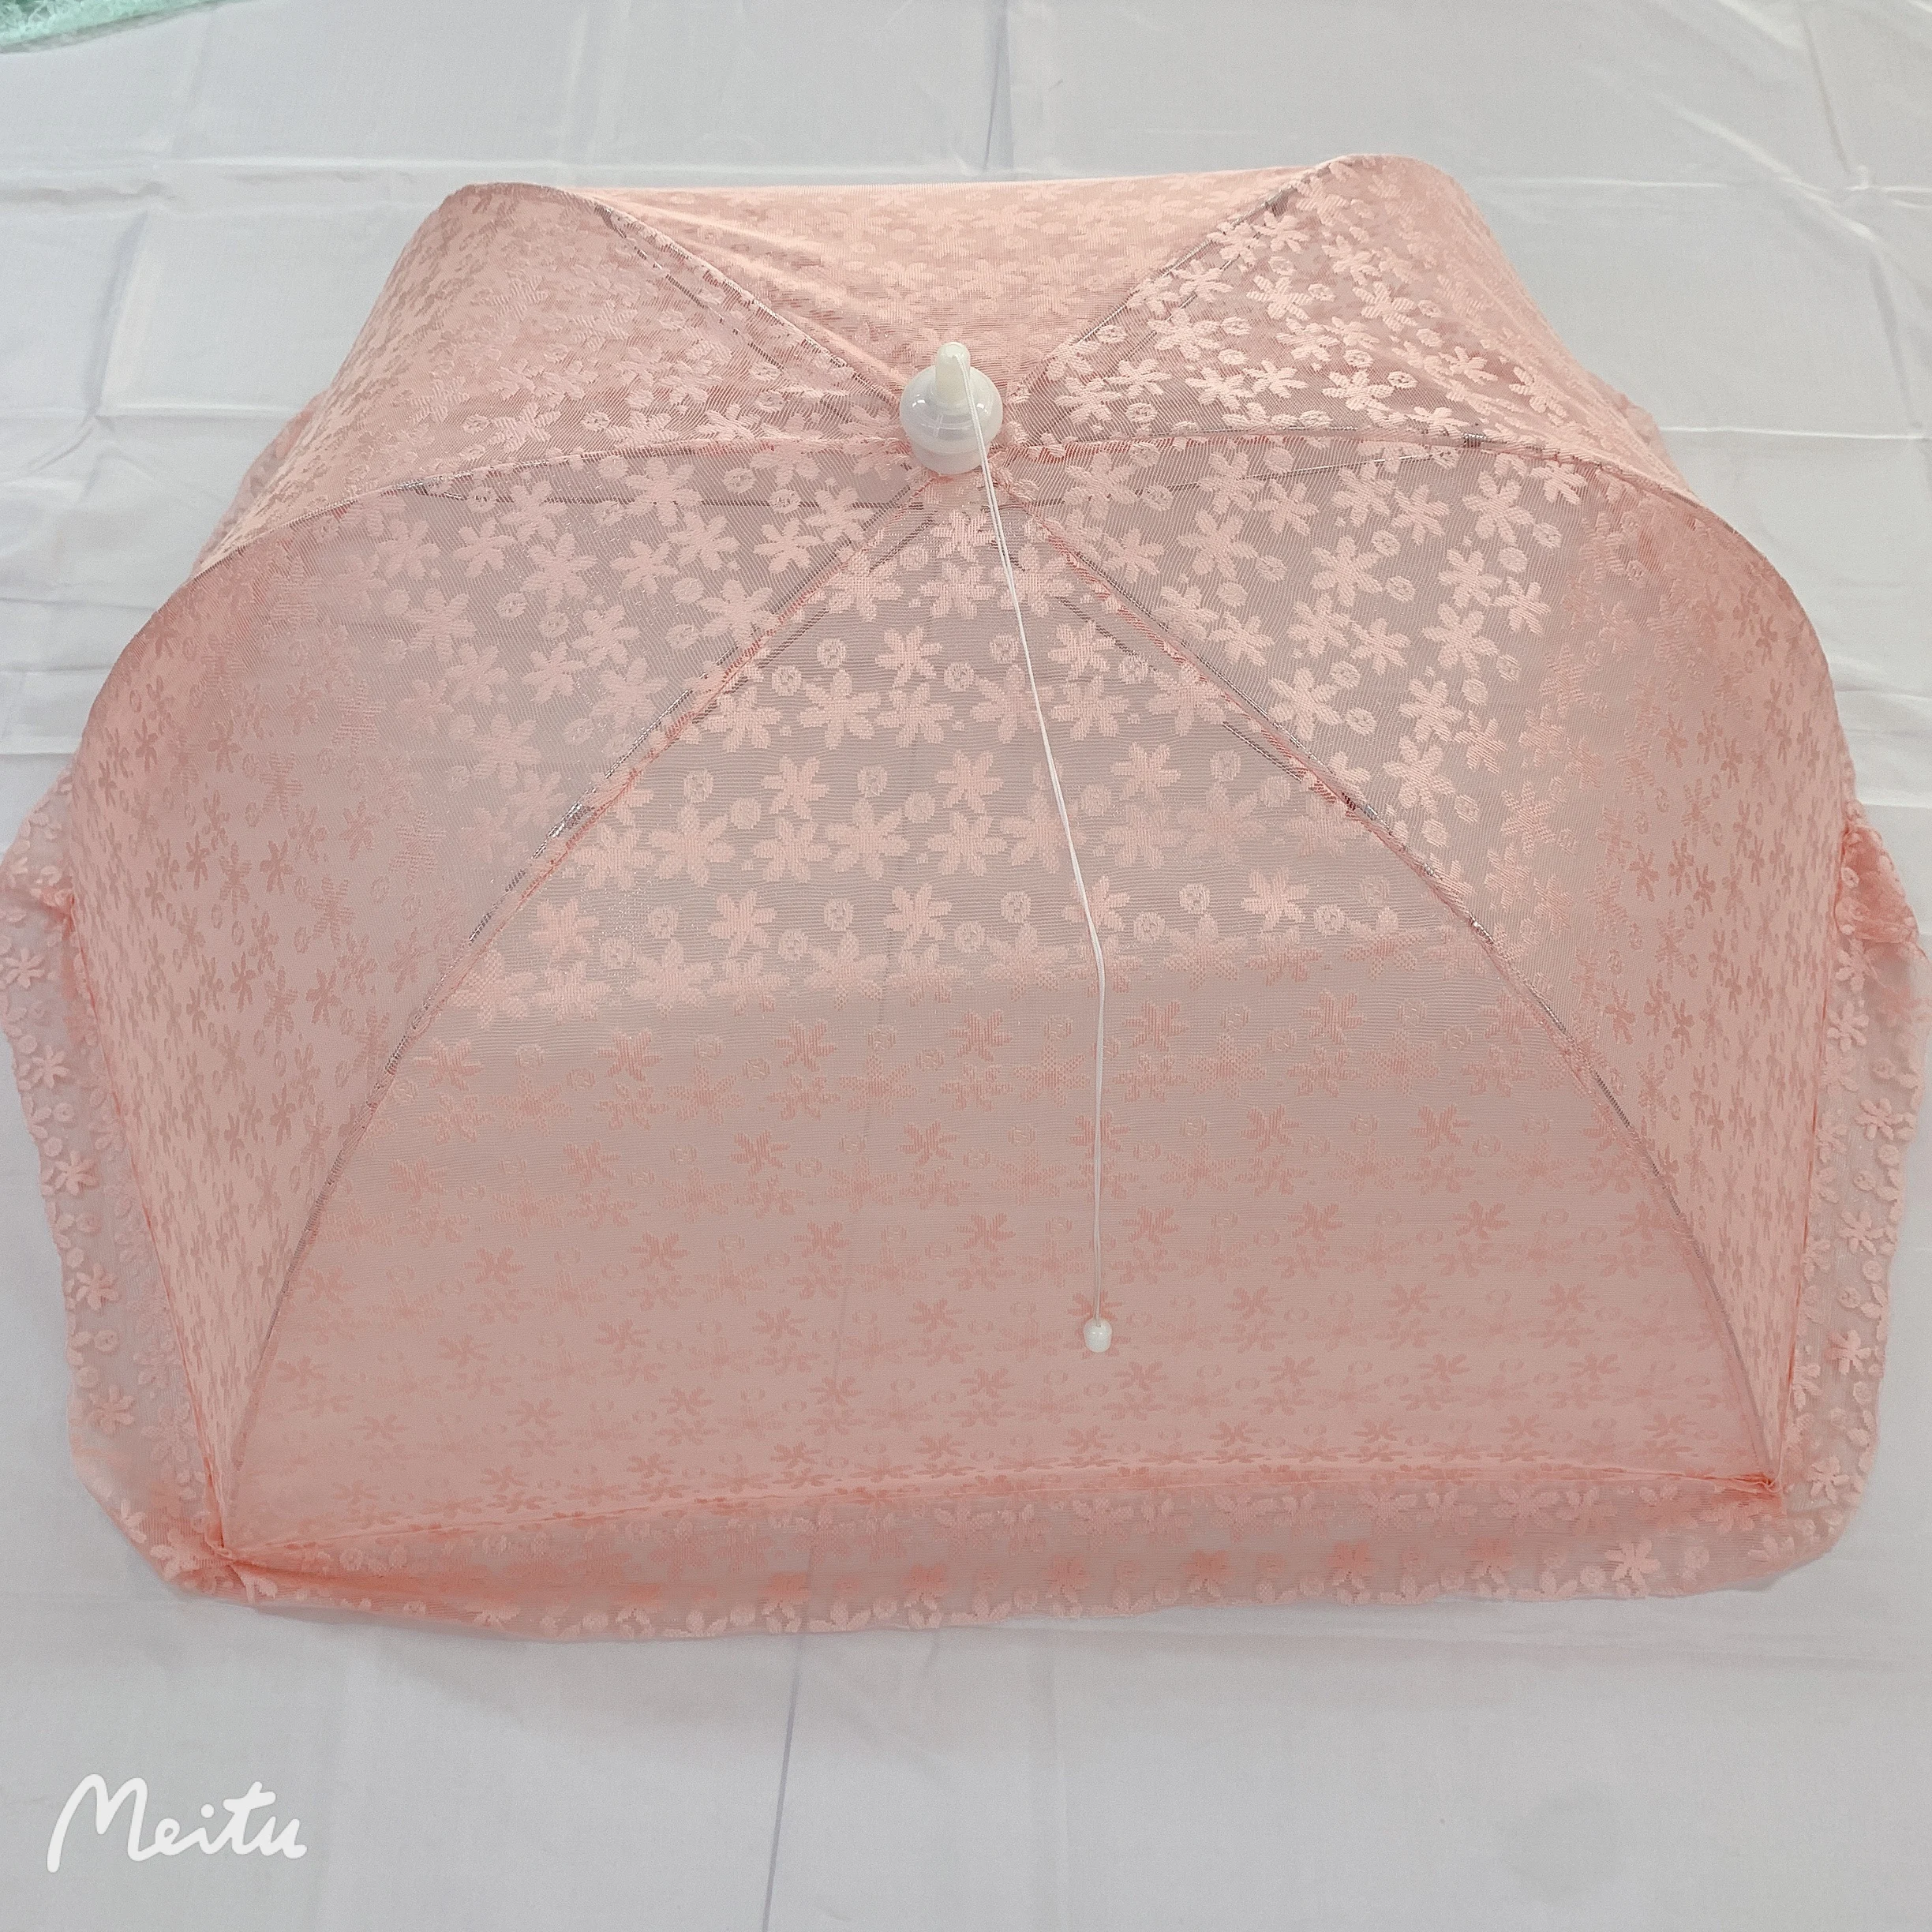 Easy carrying Luxury Home customized flower designs Baby Bed Mosquito umbrella net Mesh Top Fabric Cotton Eco Material Folded